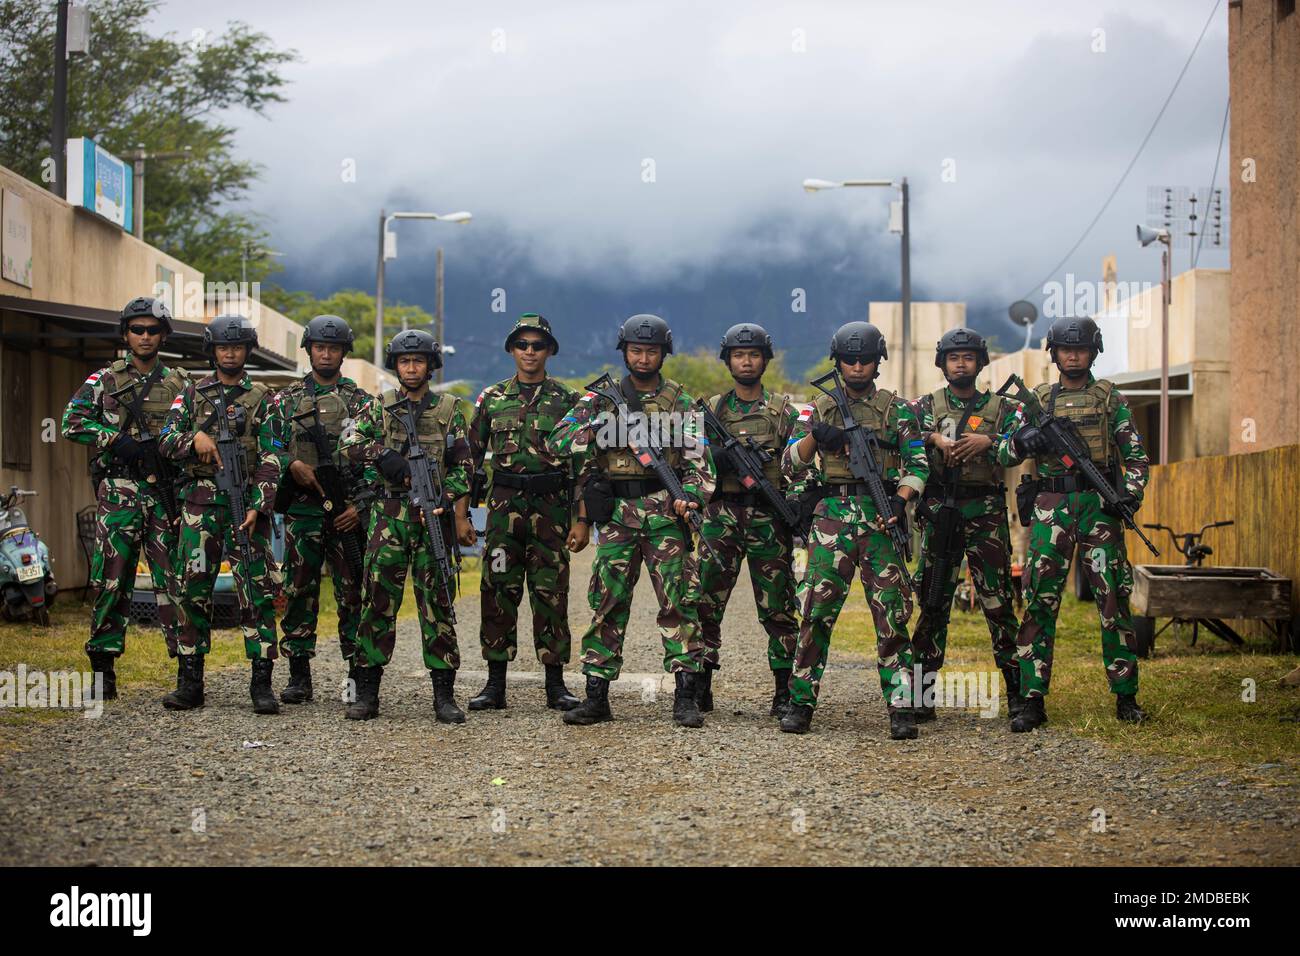 MARINE CORPS TRAINING AREA BELLOWS, Hawaii (July 15, 2022) Indonesia-Korps Marinir Republik Indonesia Marines pose for a group photo while conducting simulated Military Operations in Urban Terrain (MOUT) during Rim of the Pacific (RIMPAC) 2022, July 15. Twenty-six nations, 38 ships, four submarines, more than 170 aircraft and 25,000 personnel are participating in RIMPAC from June 29 to Aug. 4 in and around the Hawaiian Islands and Southern California. The world's largest international maritime exercise, RIMPAC provides a unique training opportunity while fostering and sustaining cooperative re Stock Photo